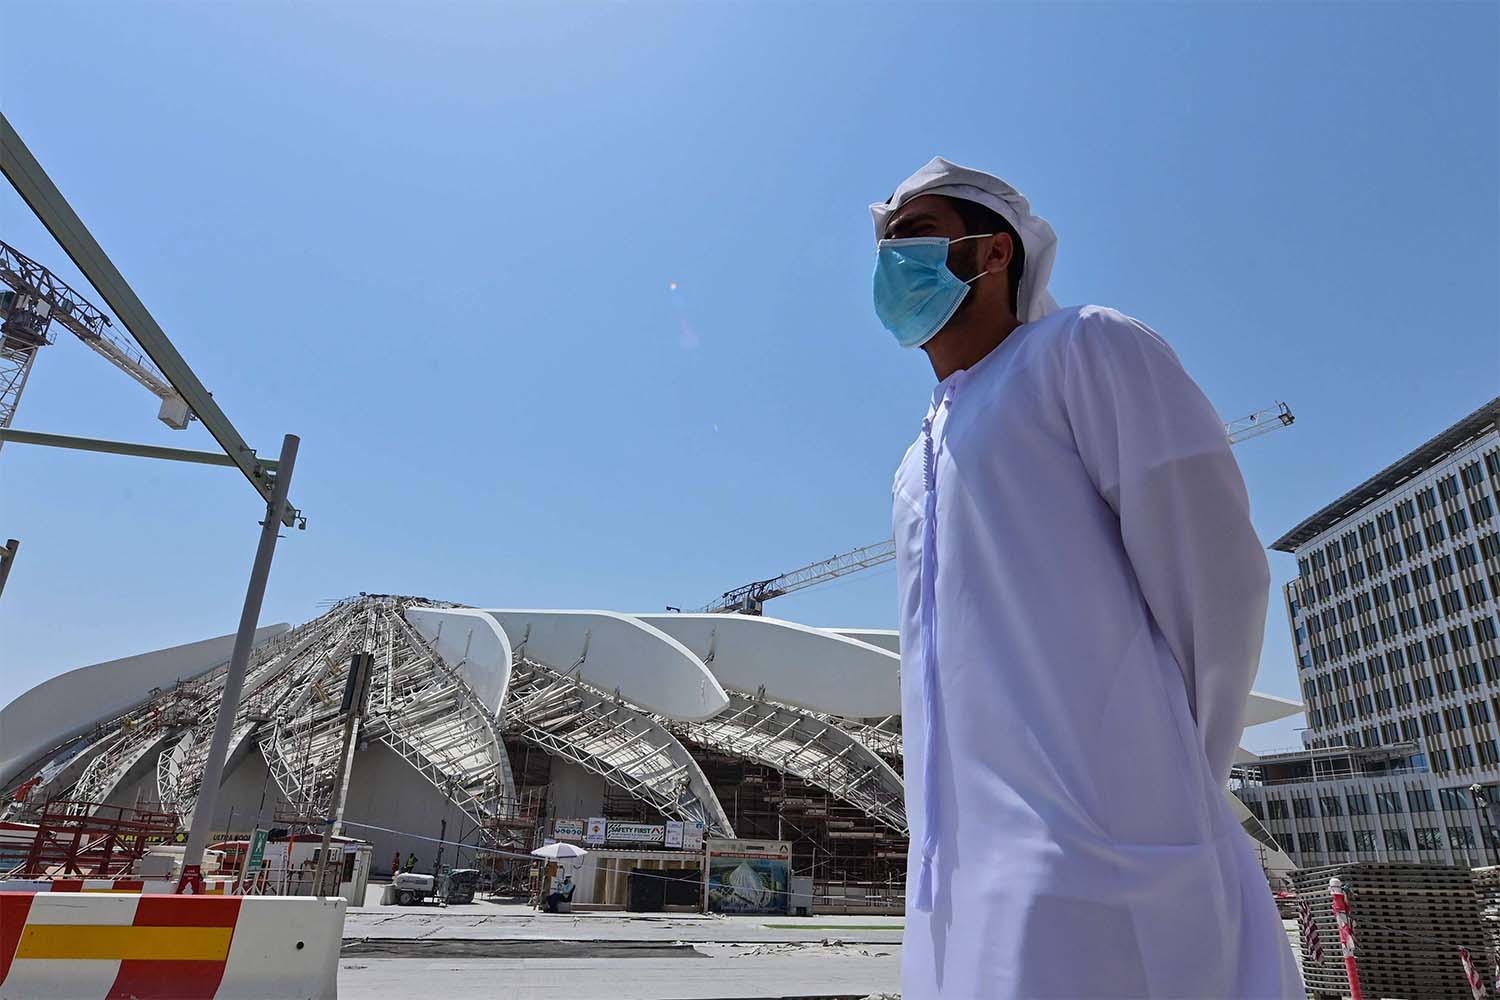 The UAE's nationwide tally stands at 94,190 infections and 419 deaths